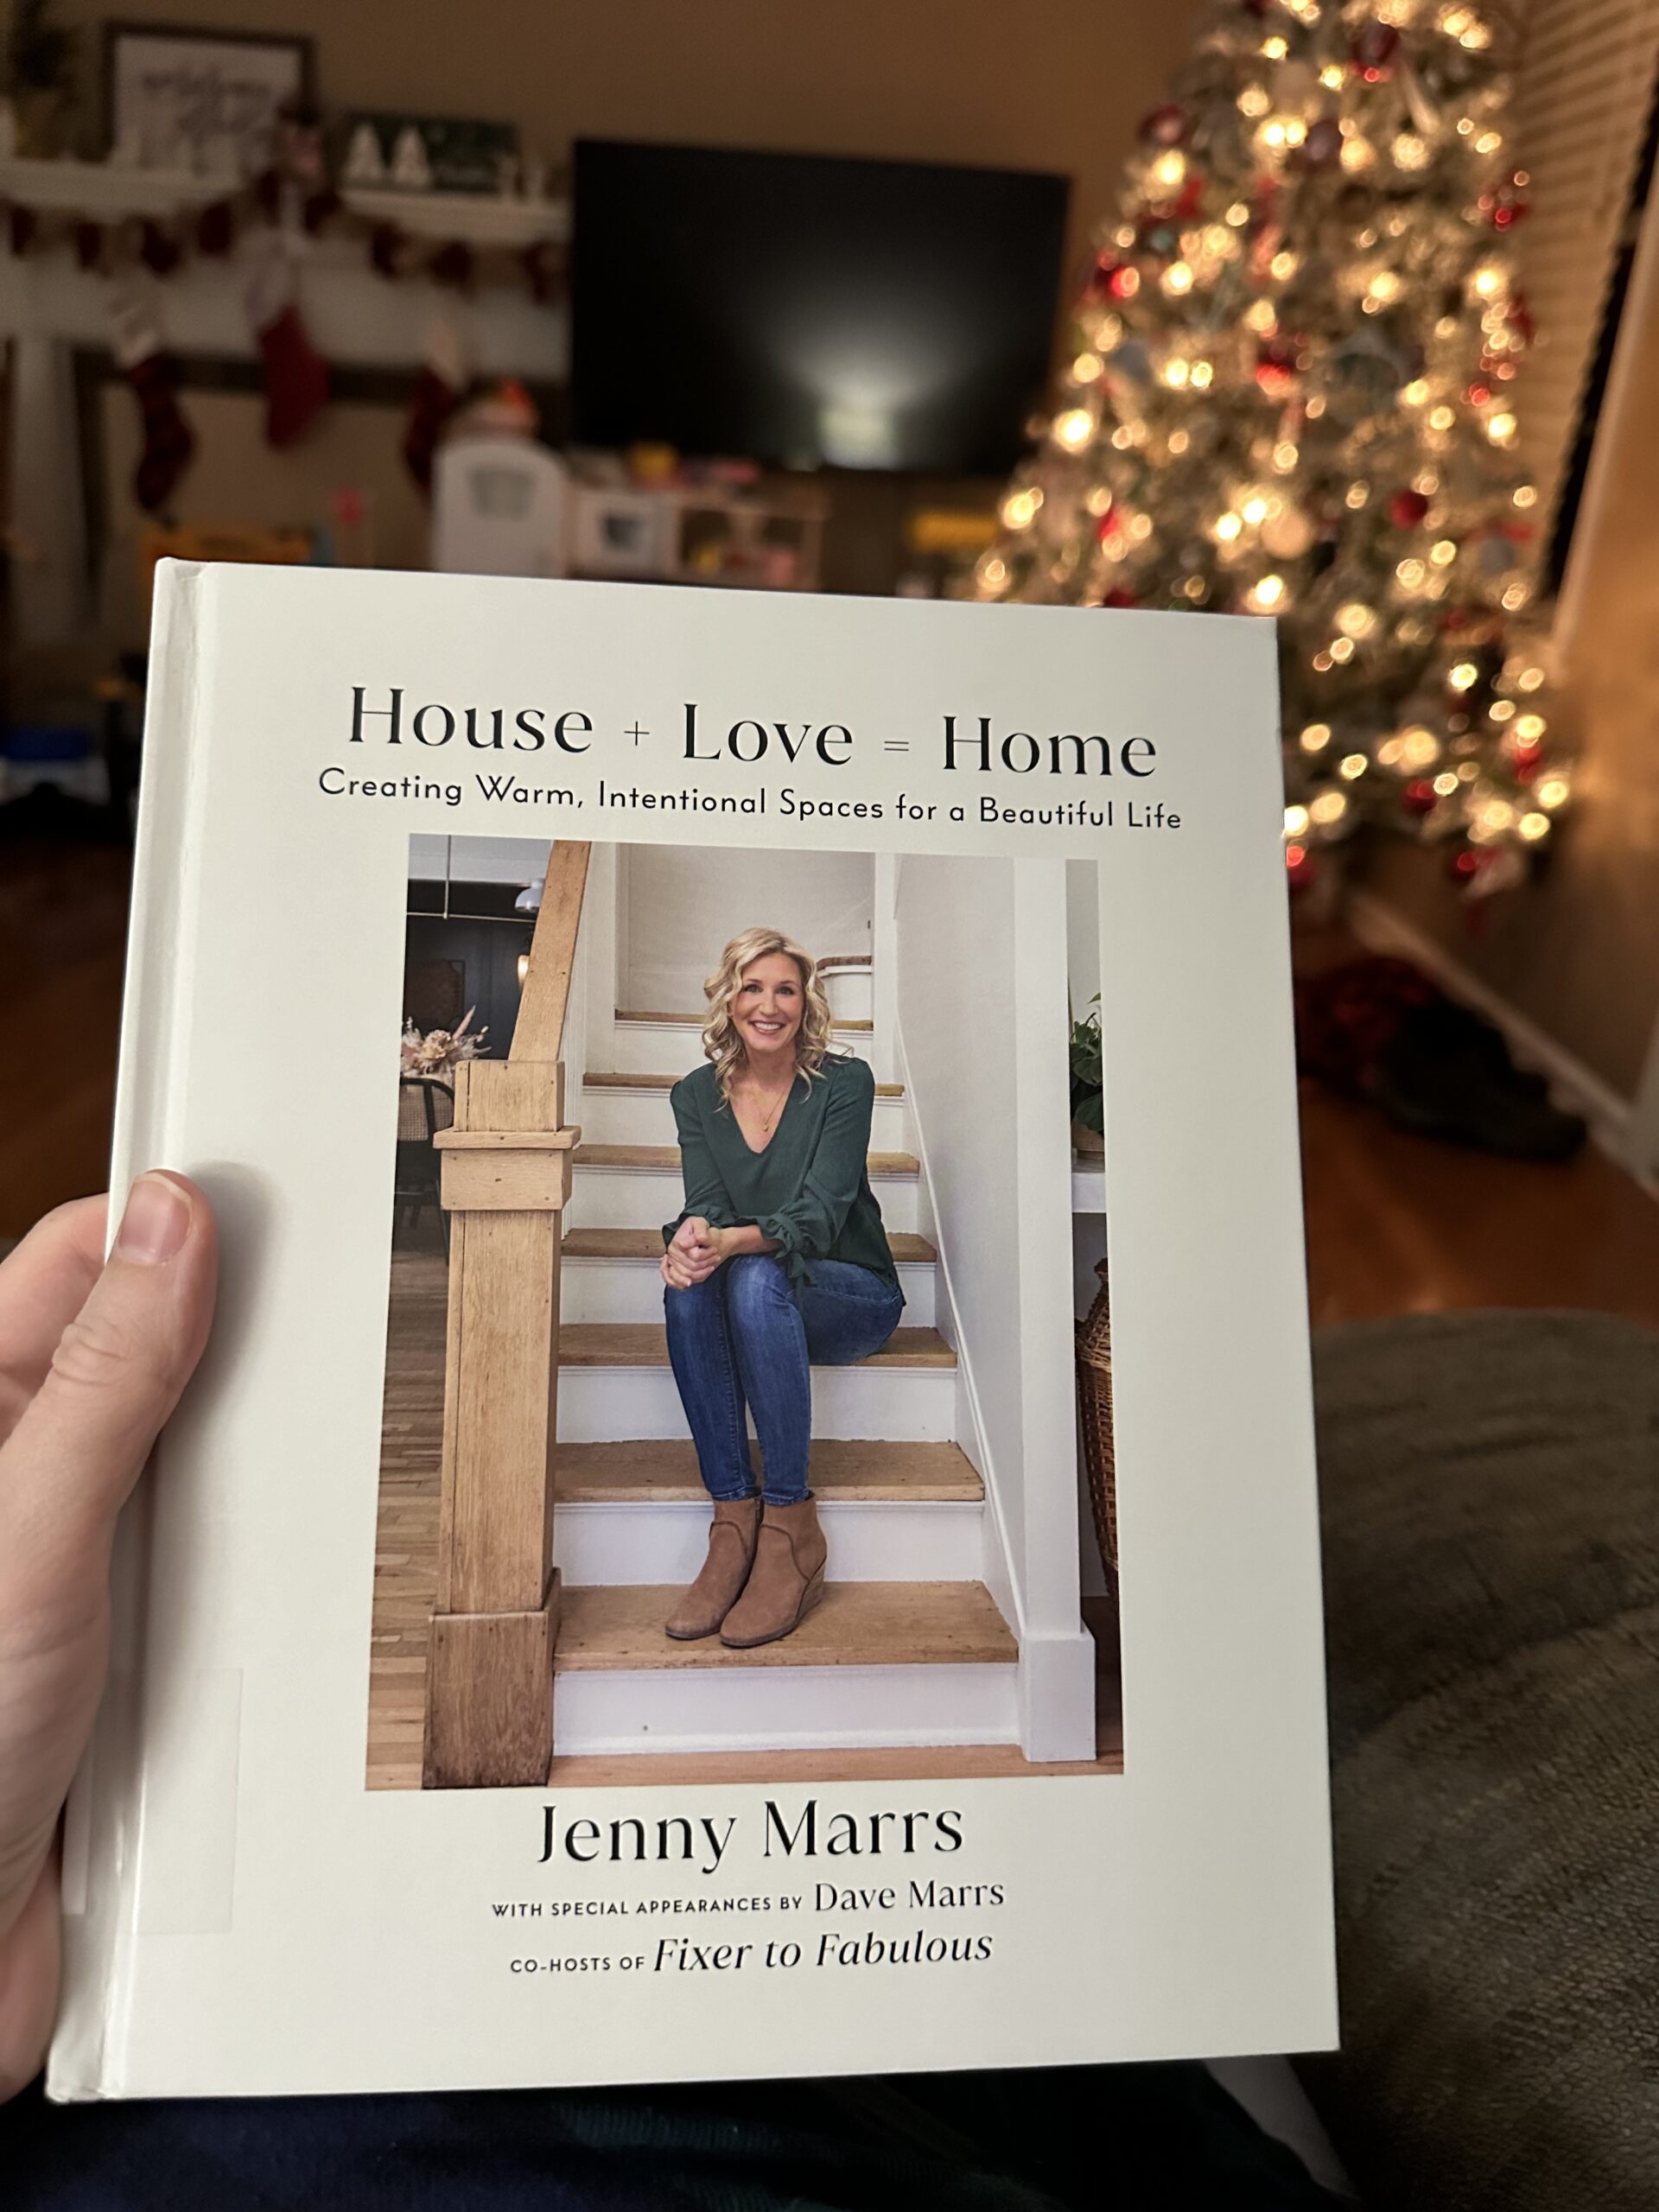 House + Love = Home by Jenny Marrs and Christmas traditions